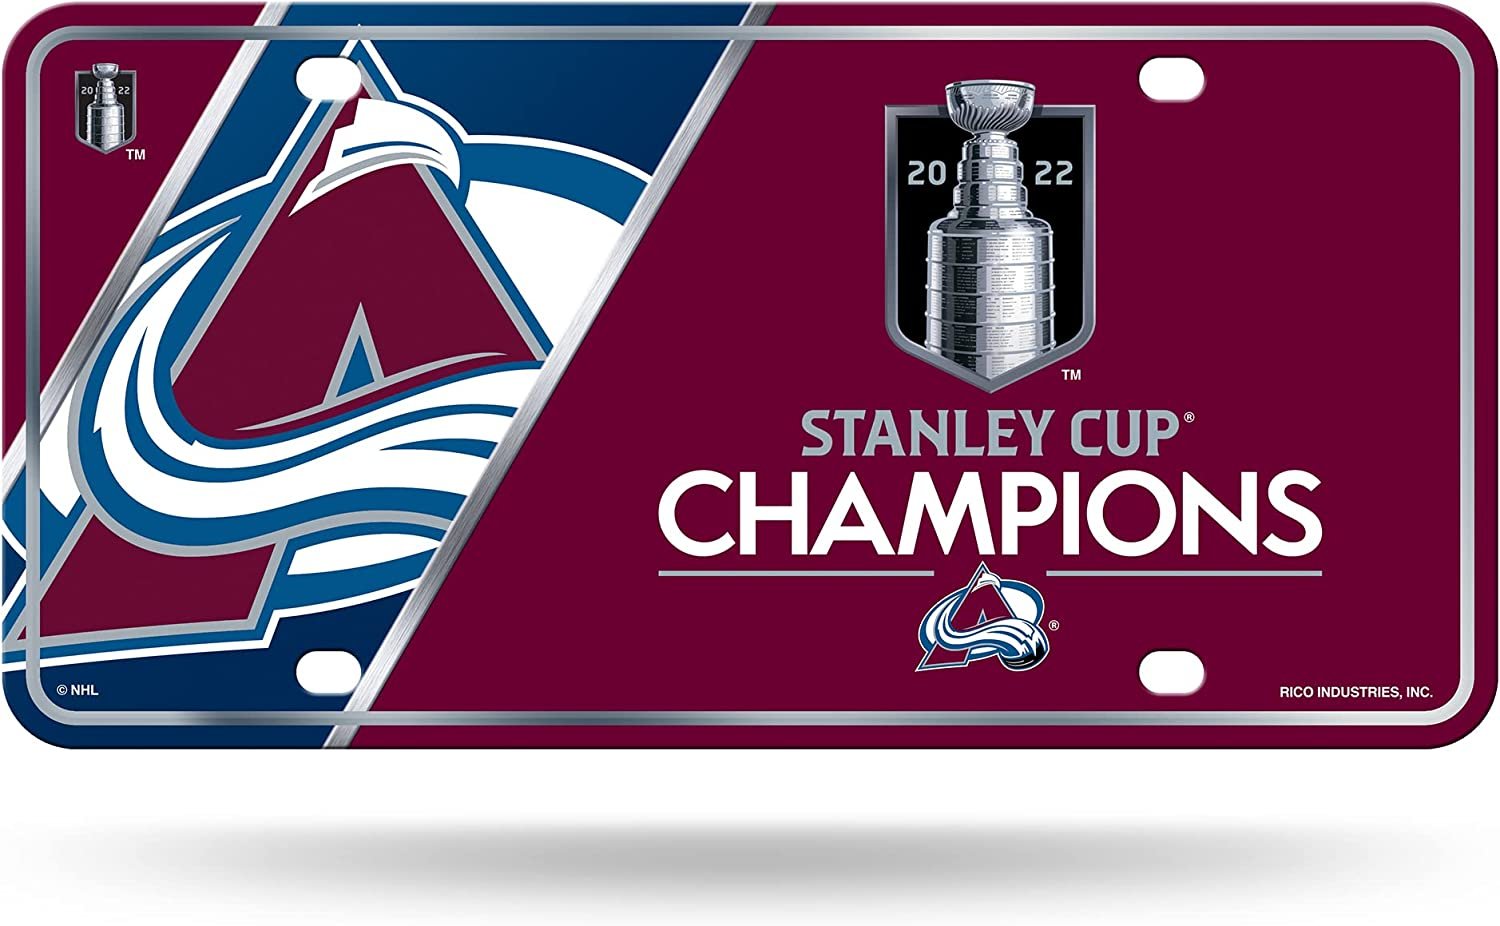 Colorado Avalanche Metal Auto Tag License Plate, 2022 Stanley Cup Champions, 12x6 Inch